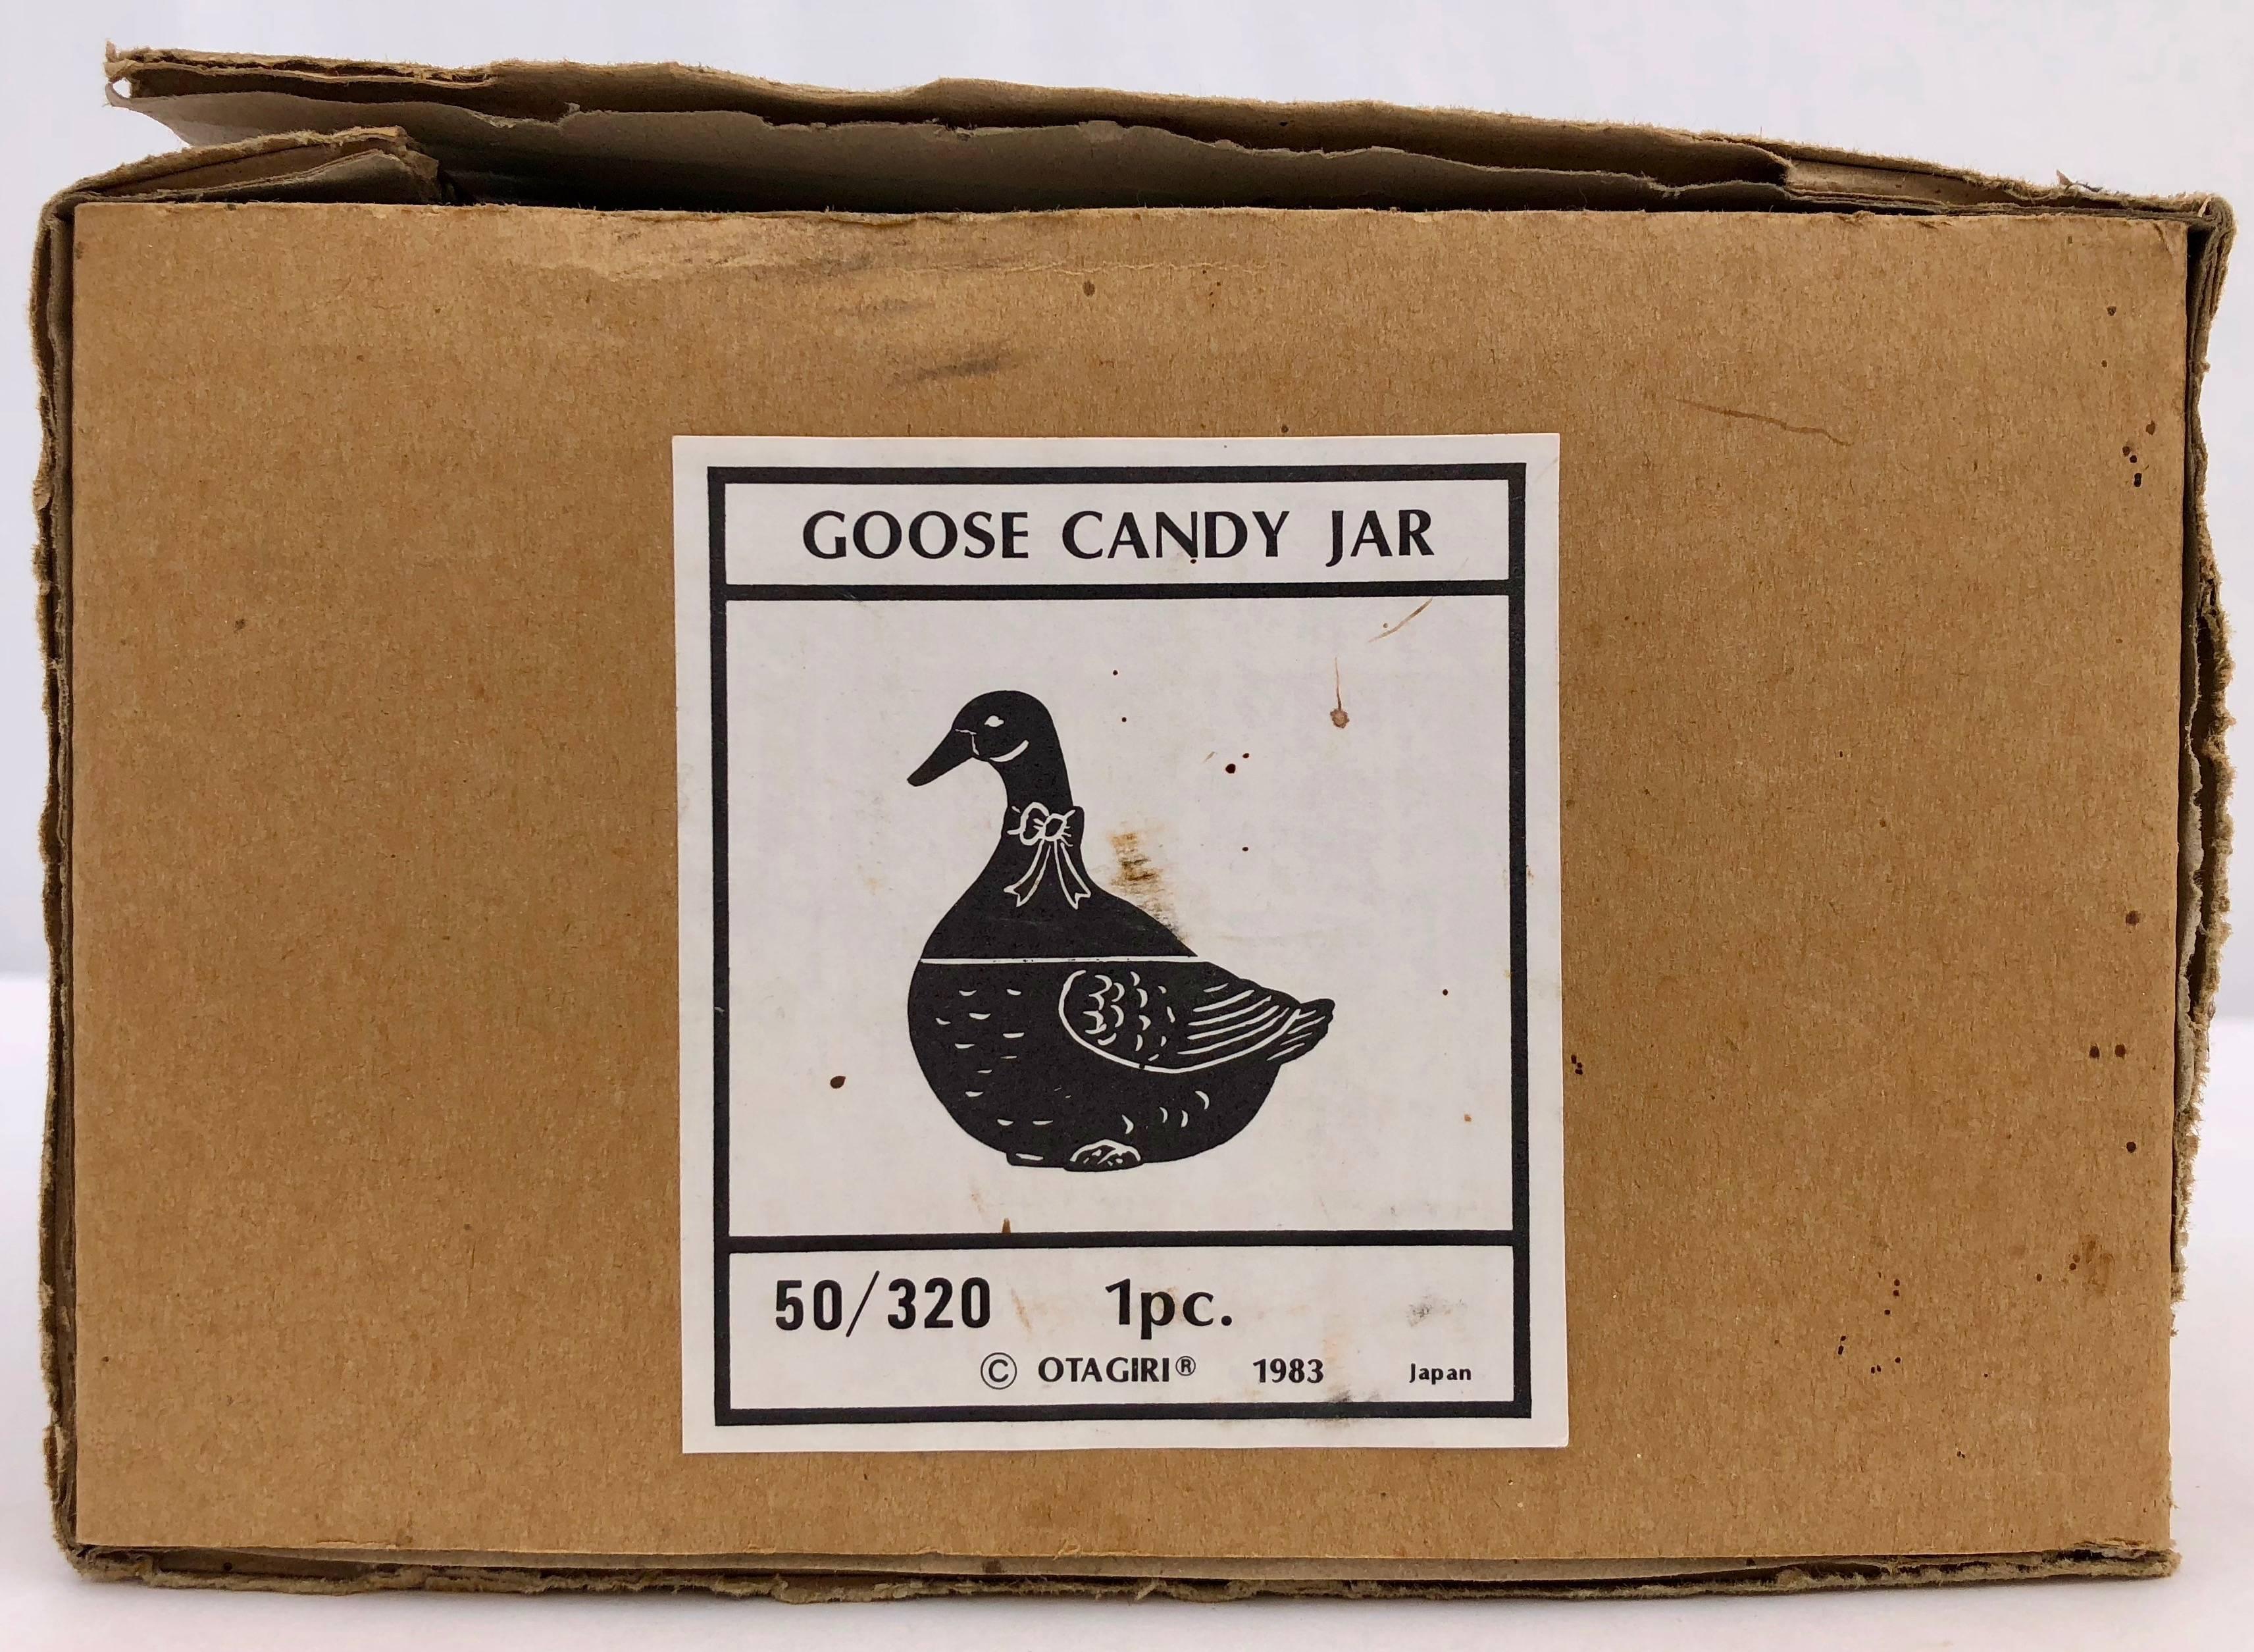 Goose Candy Jar Ceramic Handcrafted by Otagiri, Japan, 1983 in It's Original Box For Sale 2